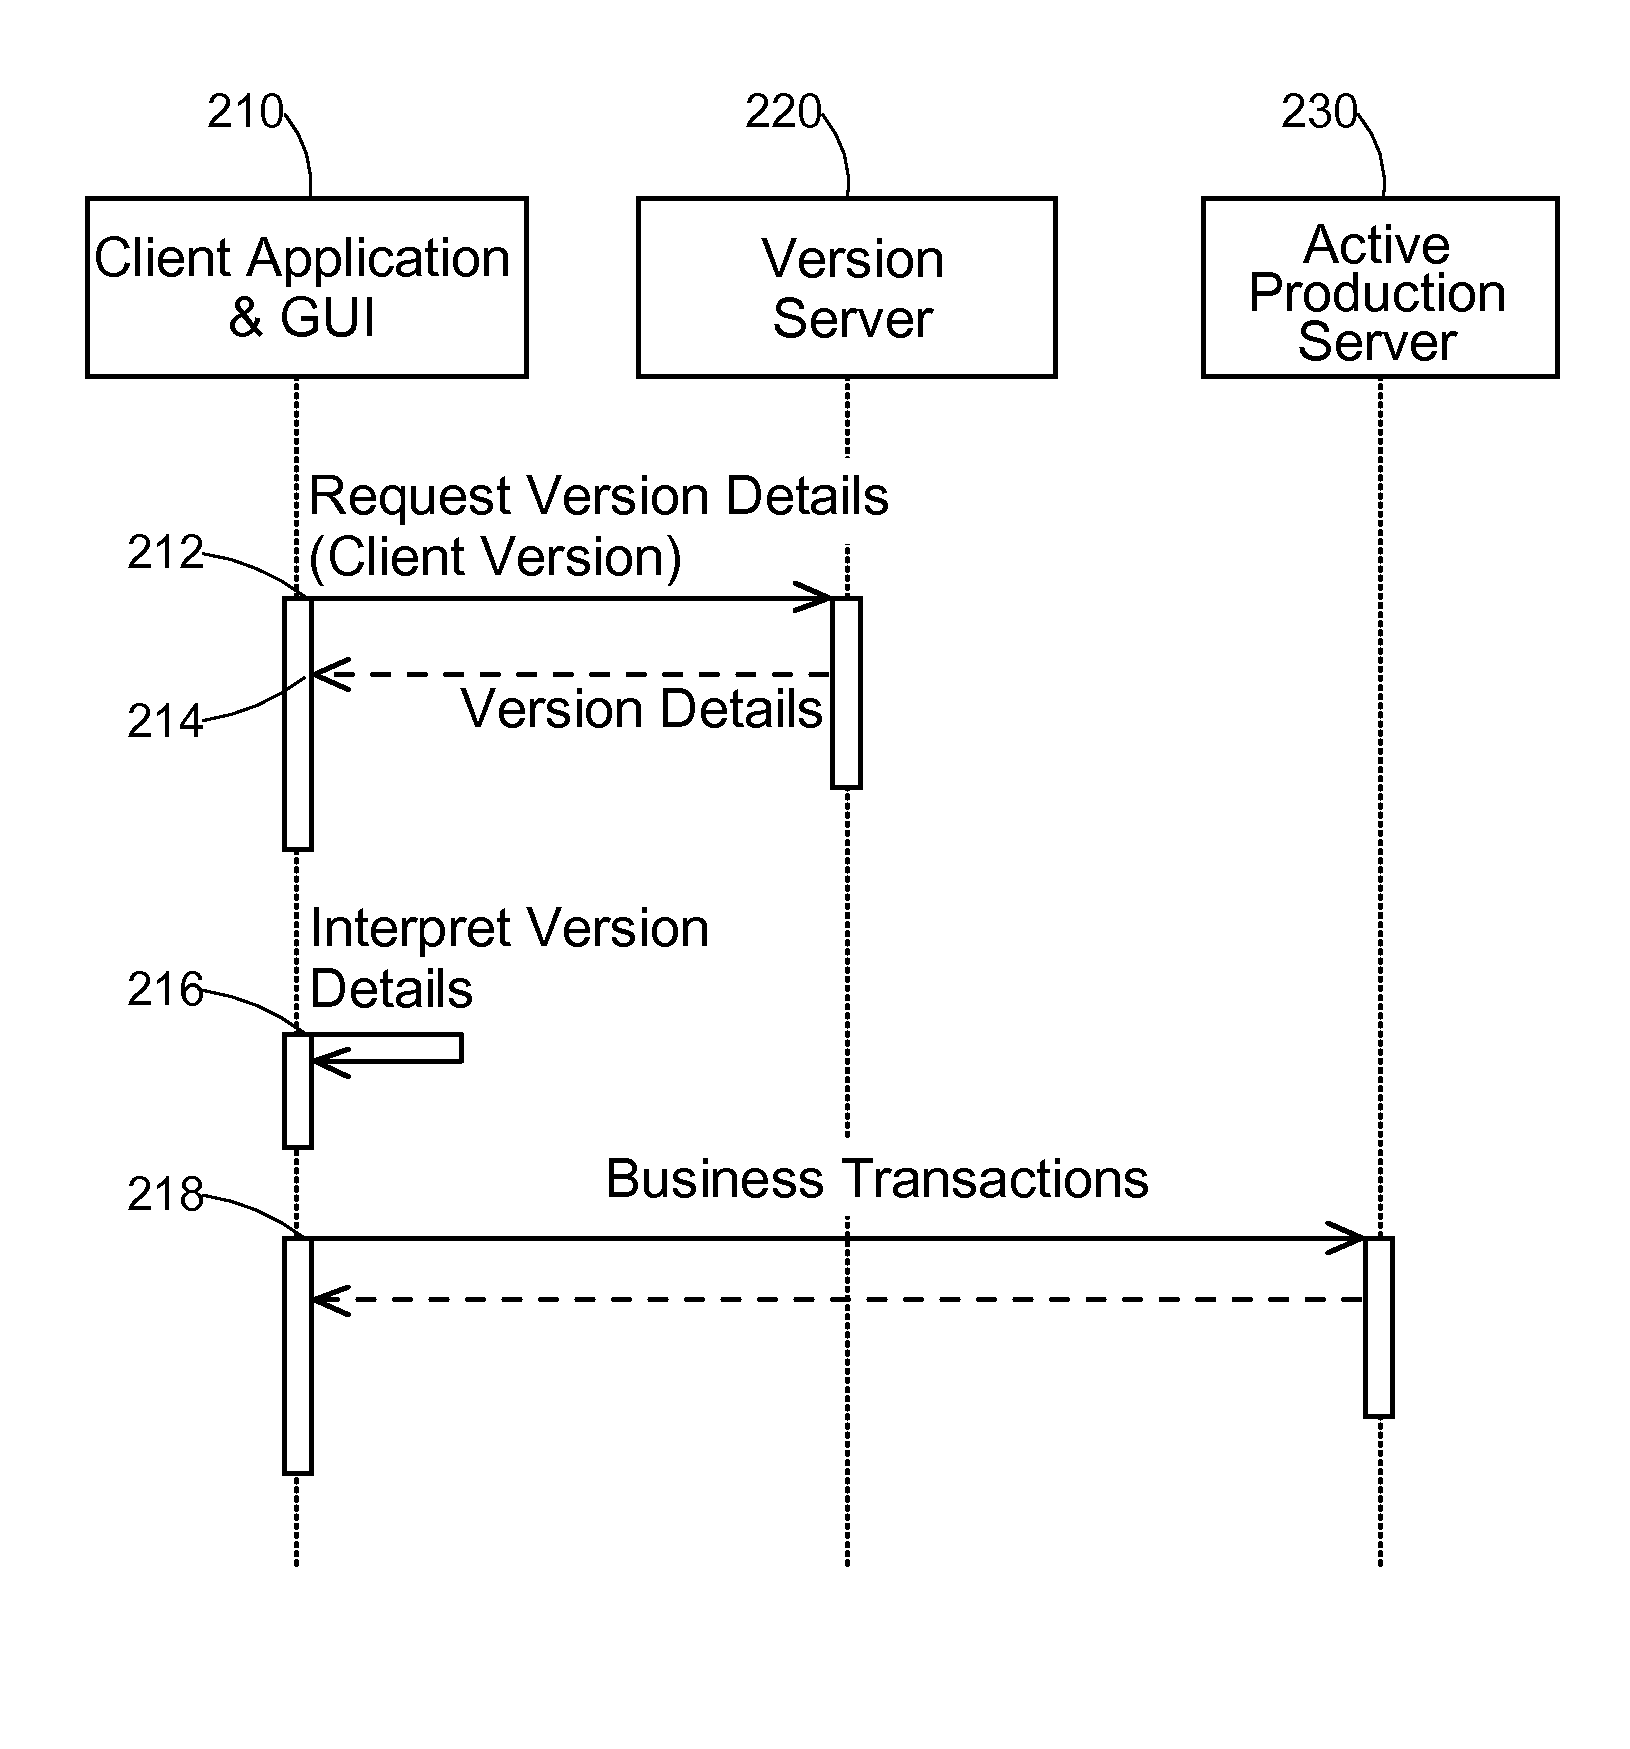 Method and system for deploying non-backward compatible server versions in a client/server computing environment